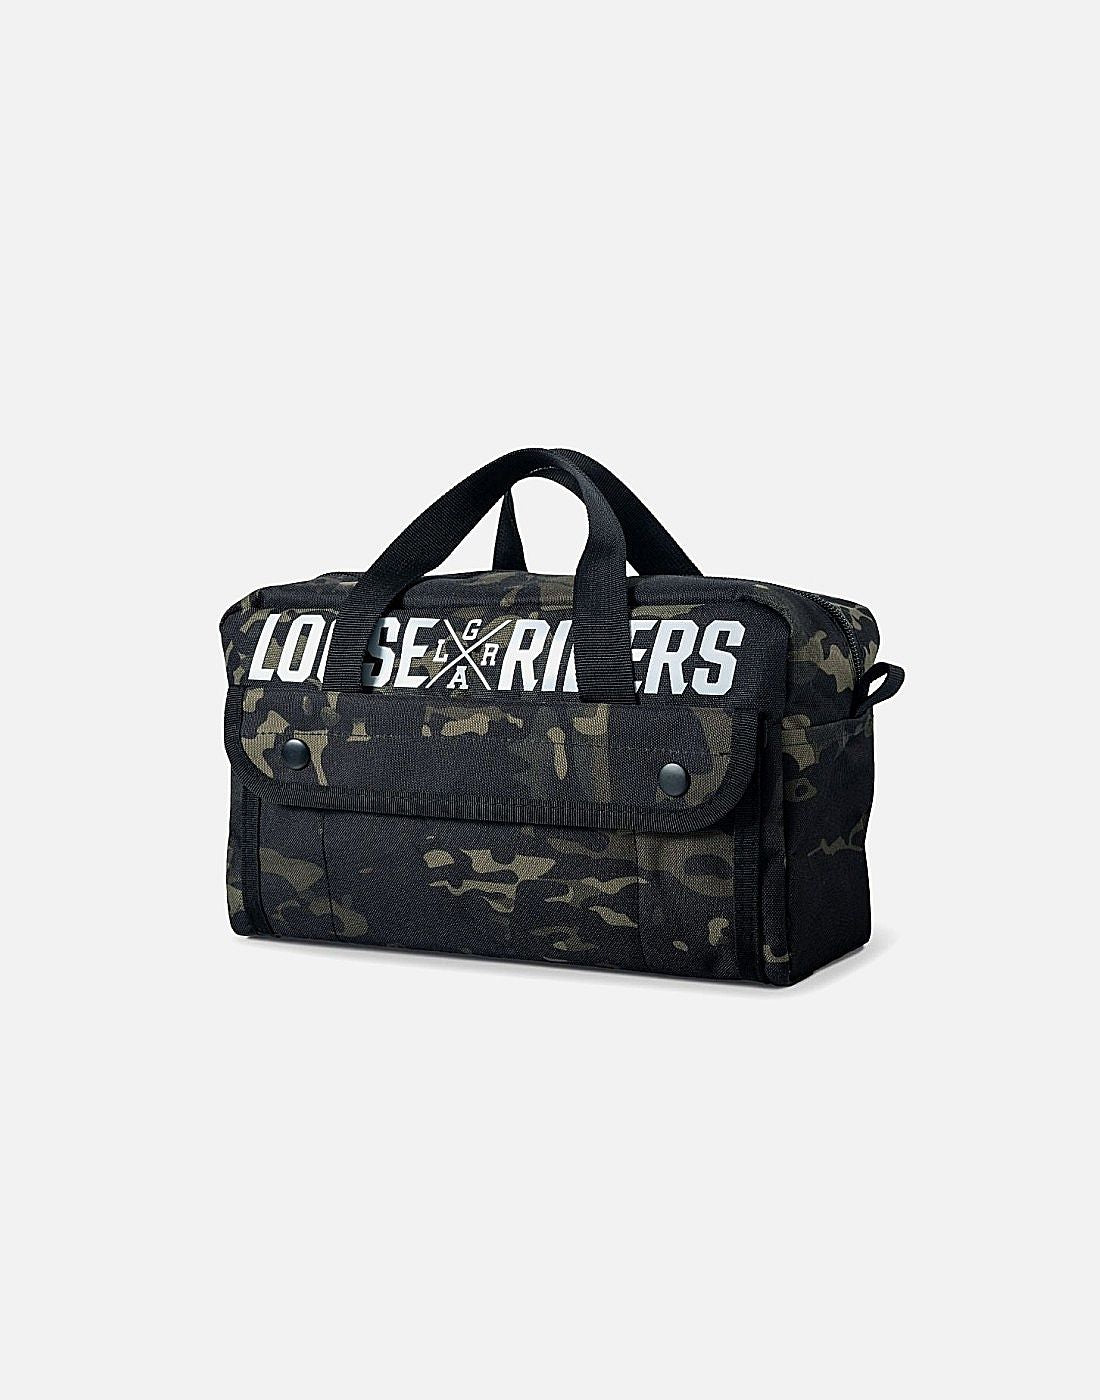 Loose Riders Accessory Toolsbags